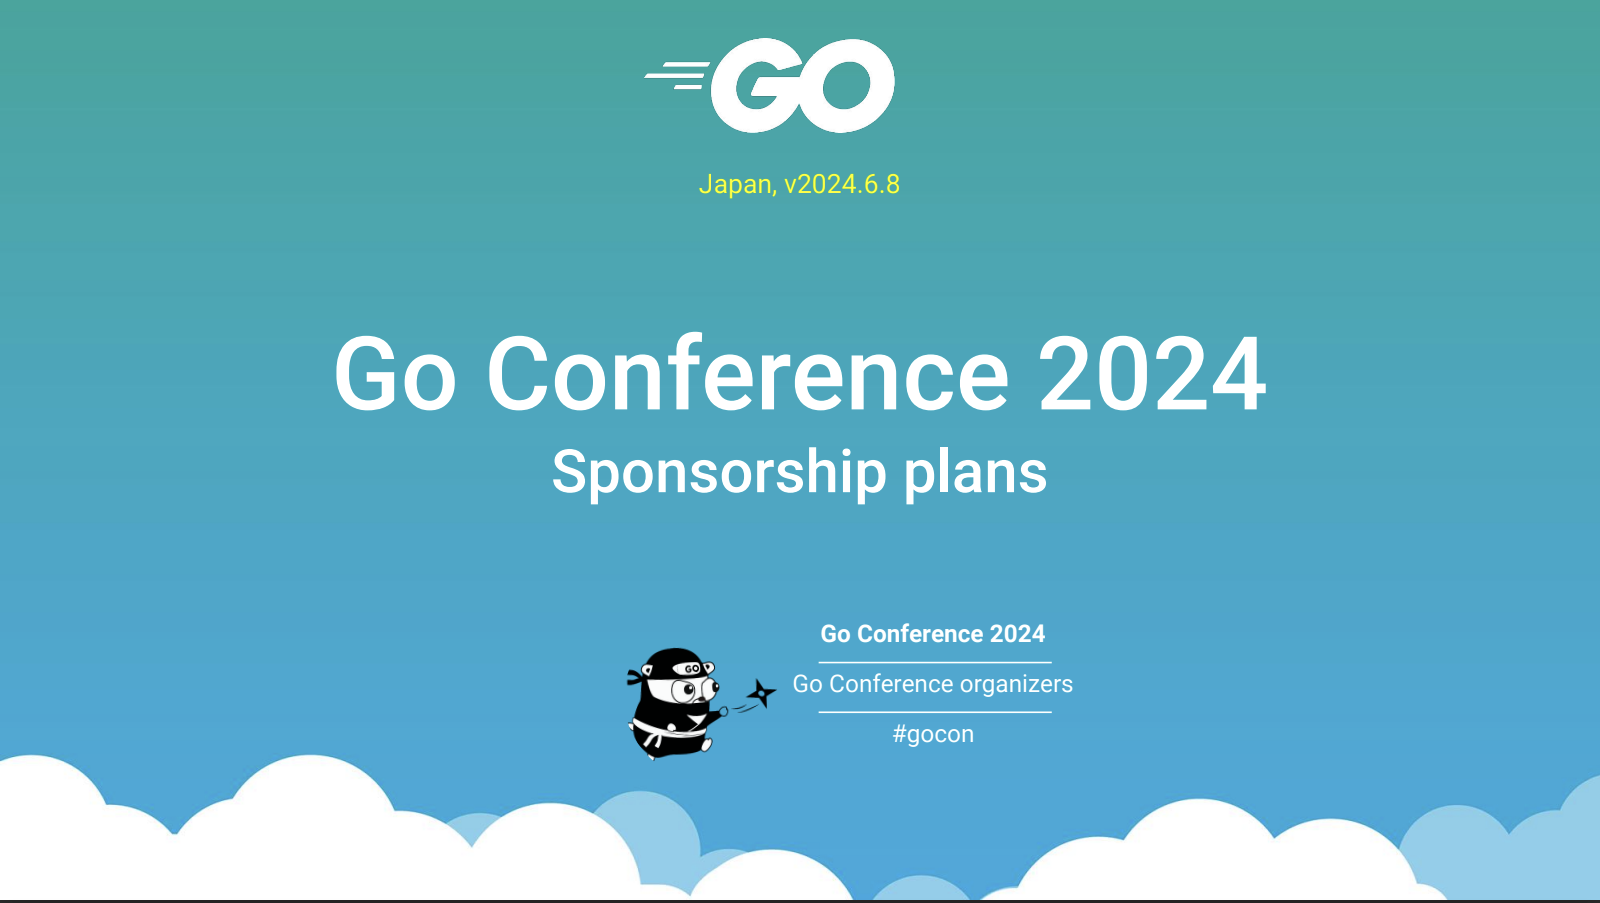 Go Conference 2024